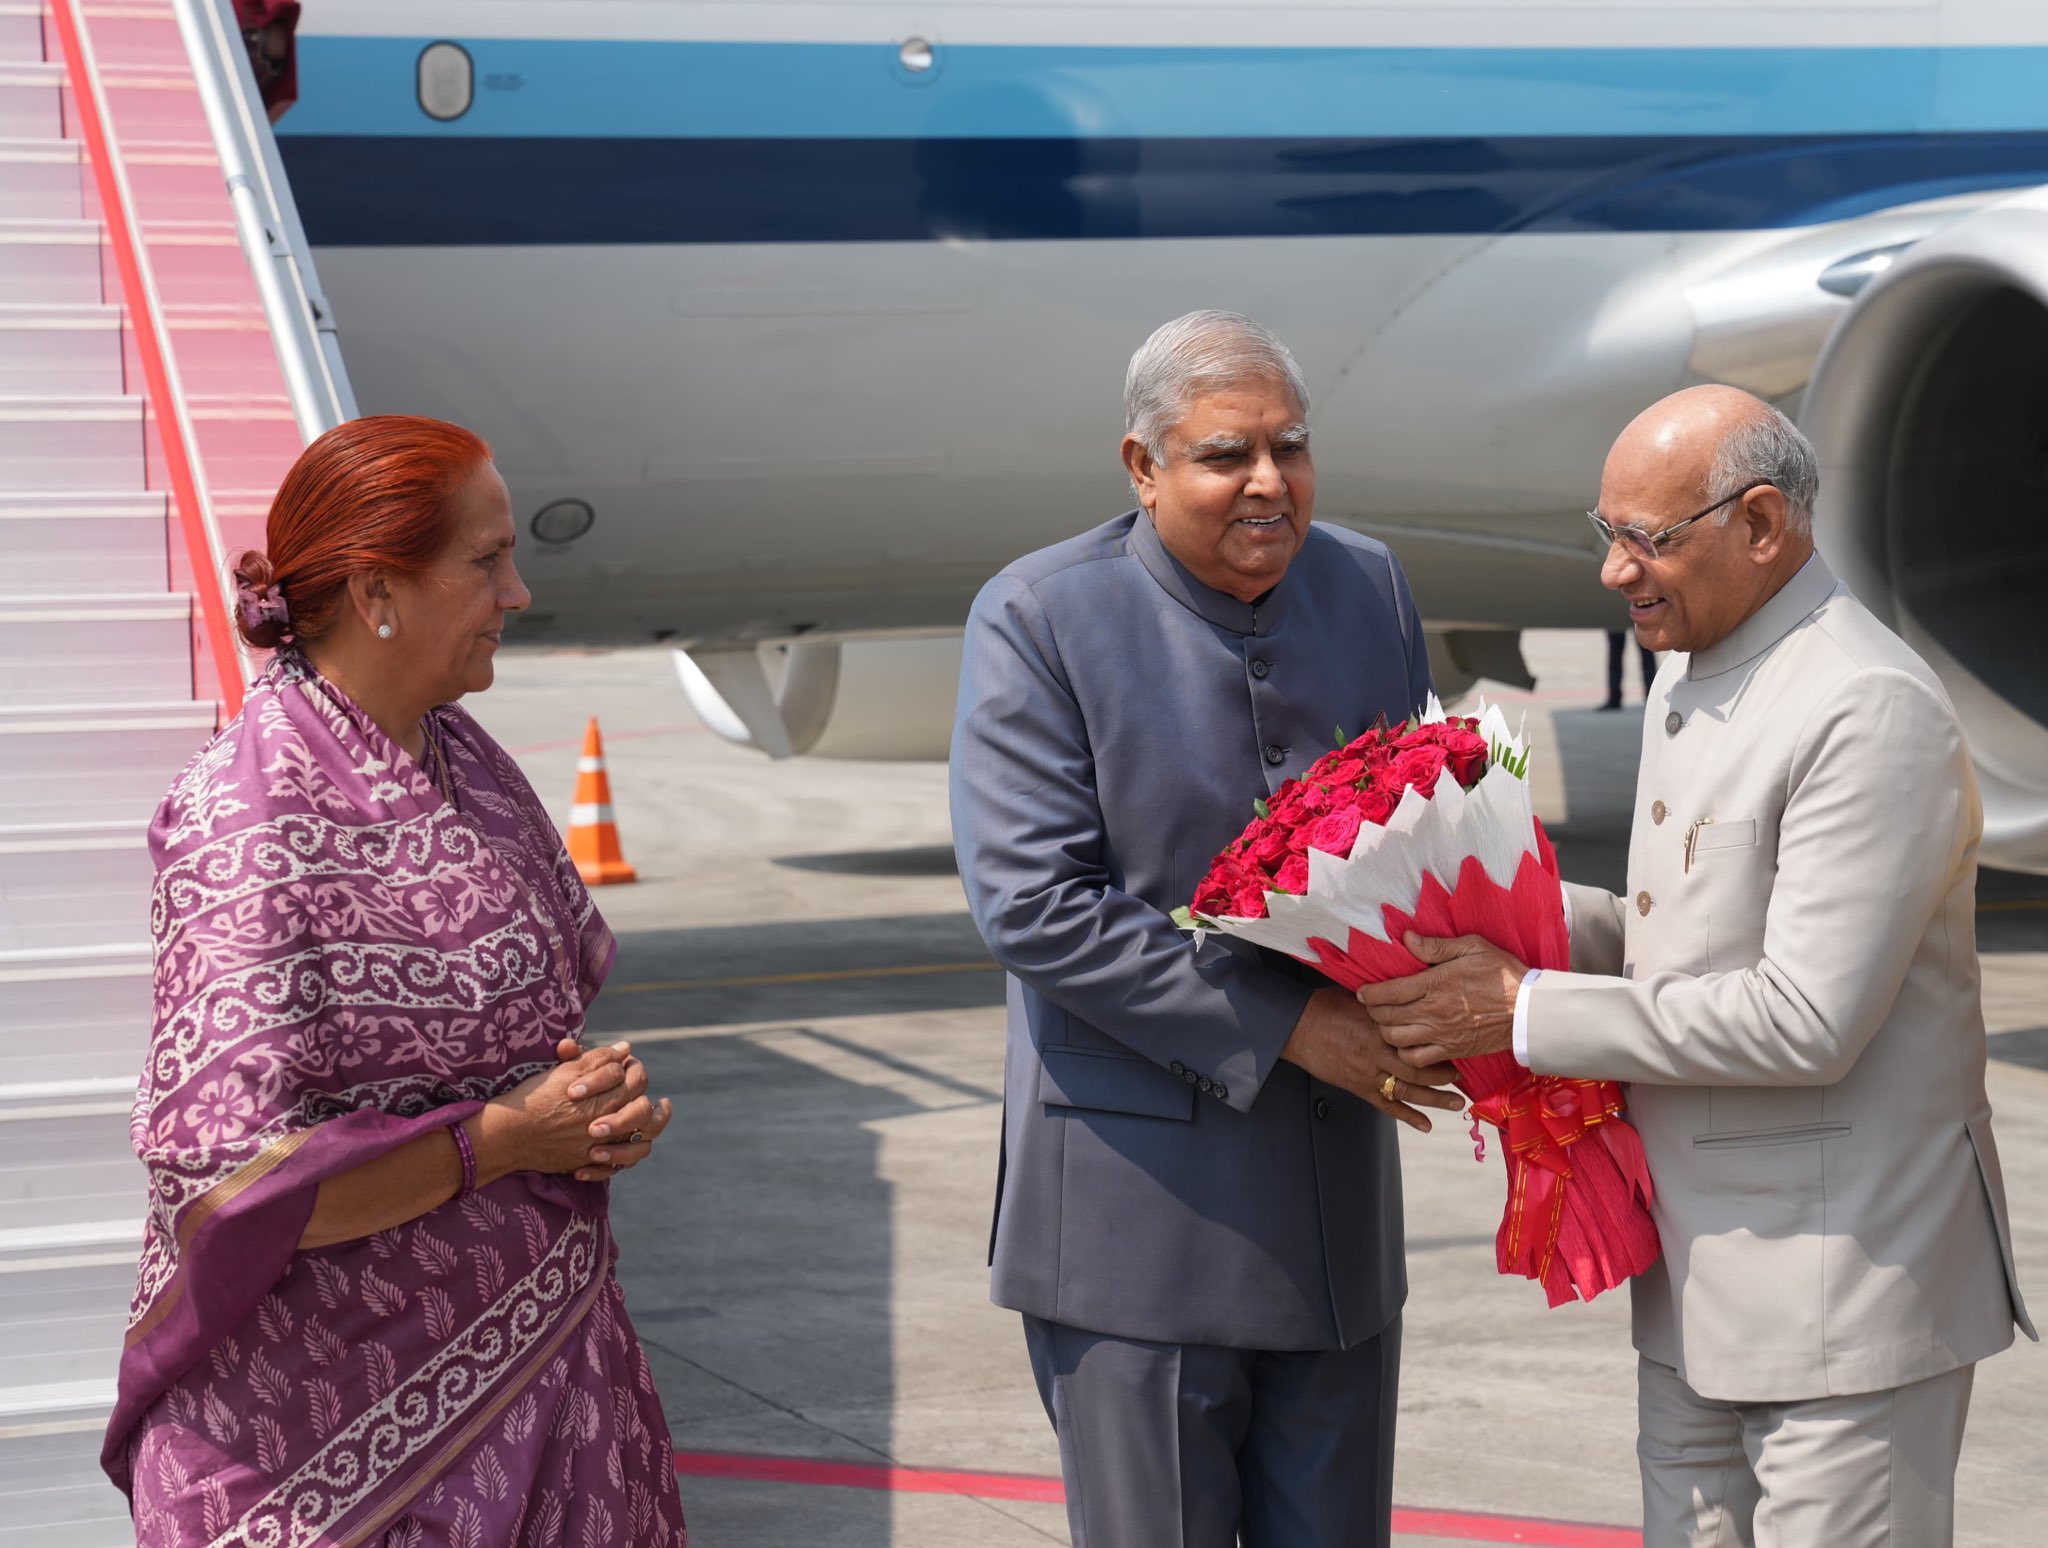 The Vice-President, Shri Jagdeep Dhankhar & Dr. Sudesh Dhankhar being welcomed by Shri Ramesh Bais, Governor of Maharashtra, and other dignitaries on their arrival in Nagpur, Maharashtra on April 15, 2024.